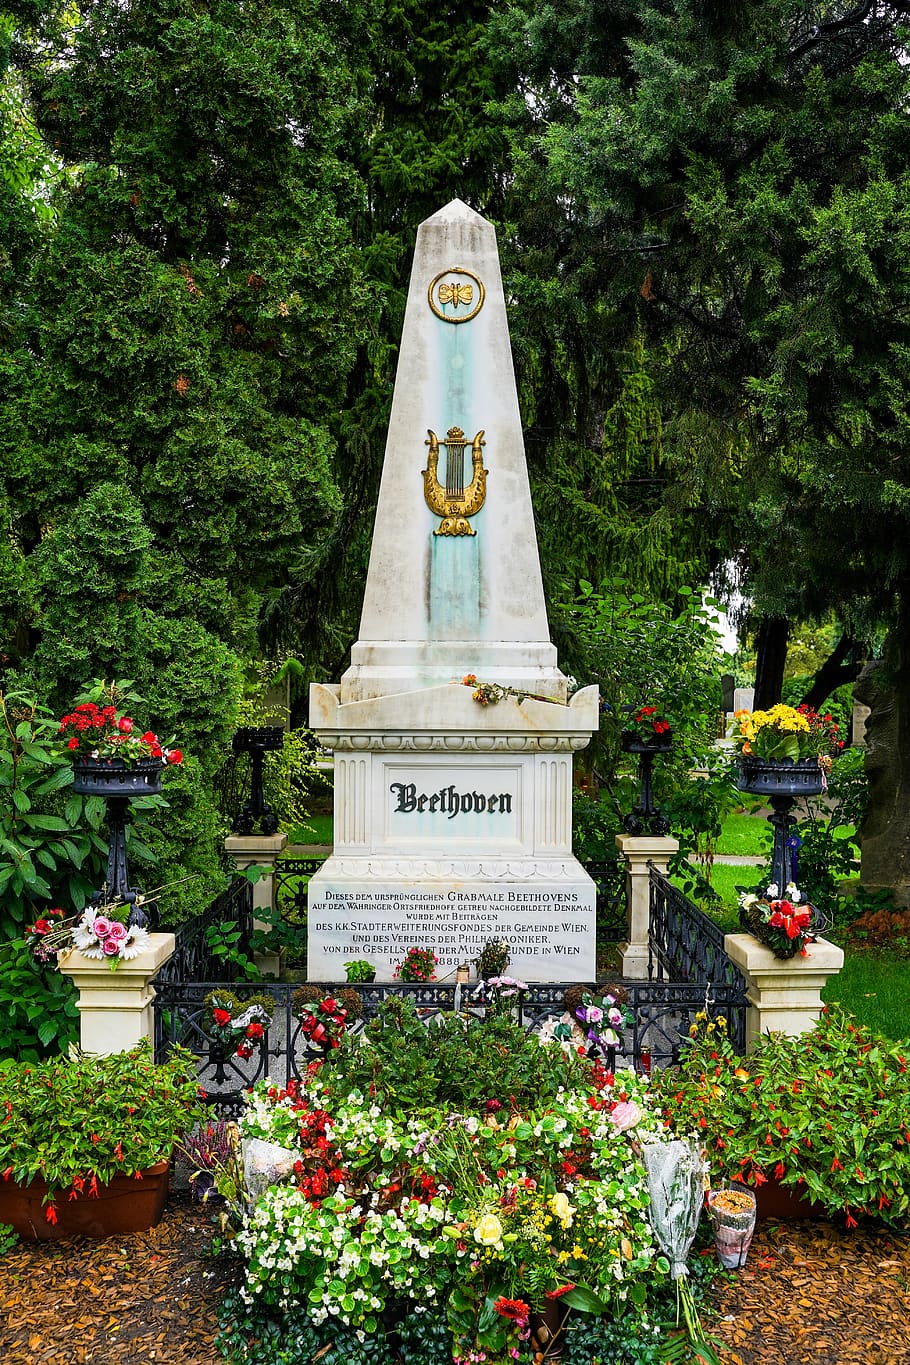 vienna's central cemetery, vienna, central cemetery, graves, tombstone, sad, austria, tomb, atmospheric, funeral